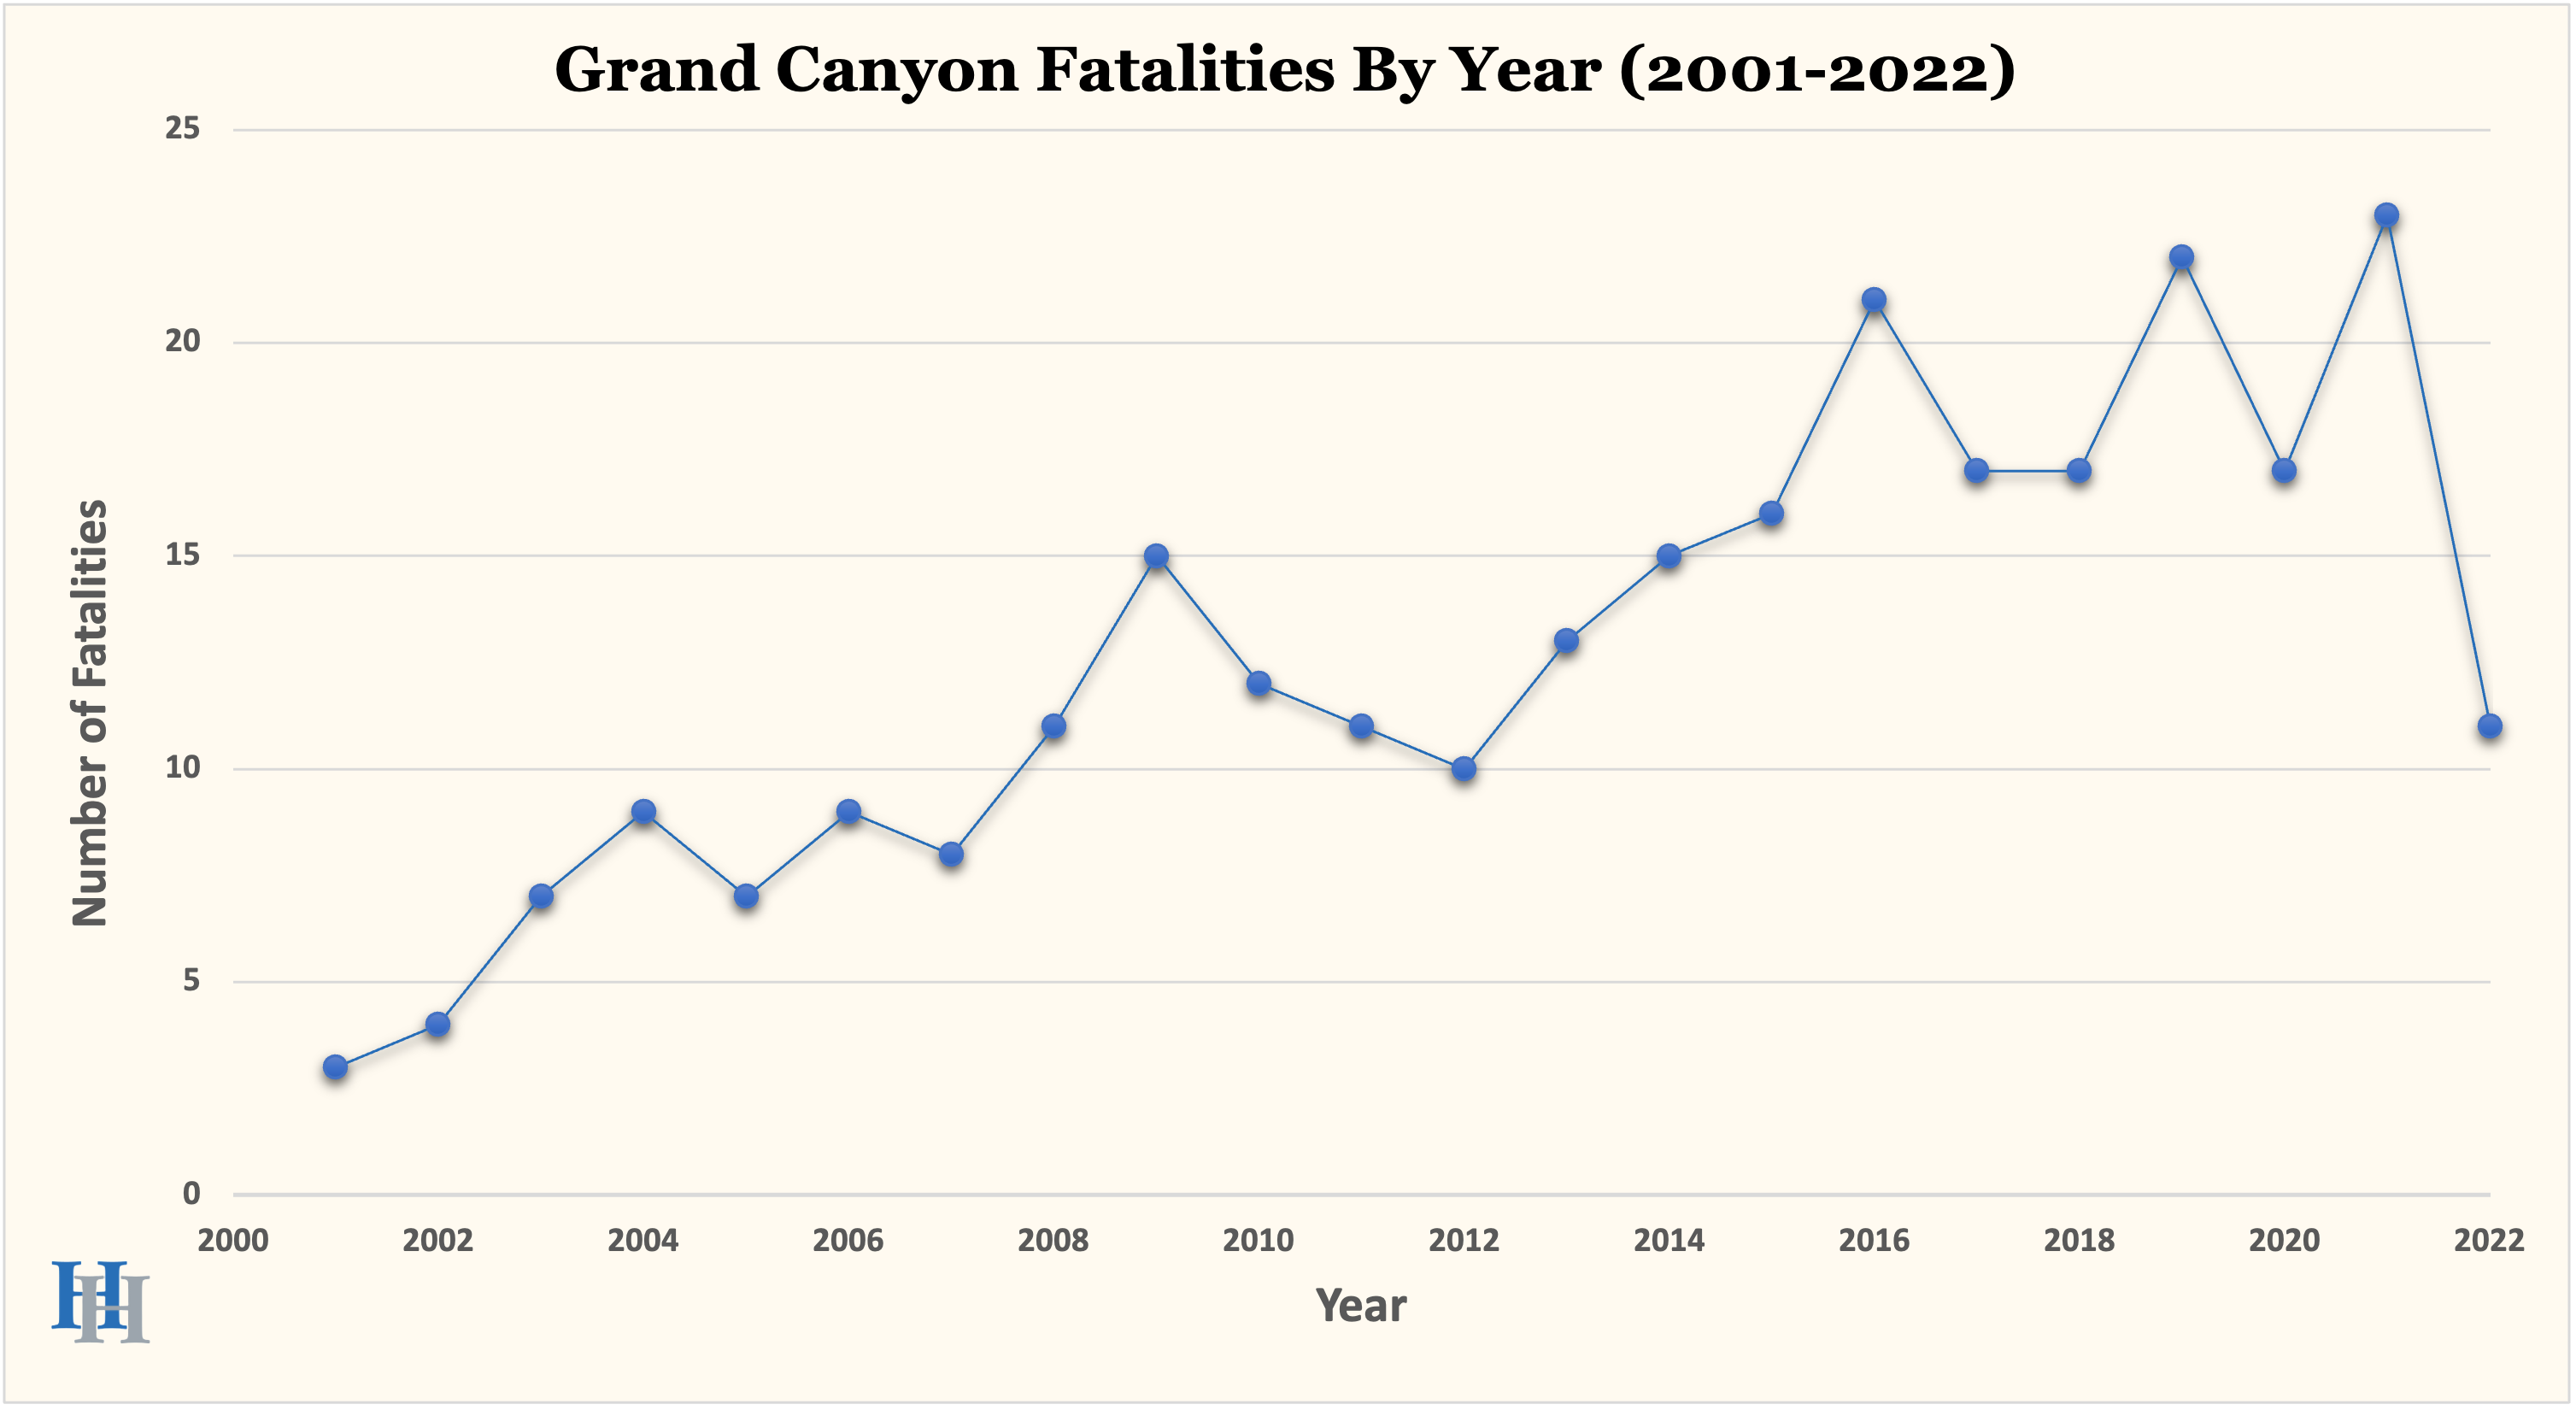 Grand Canyon Fatalities By Year